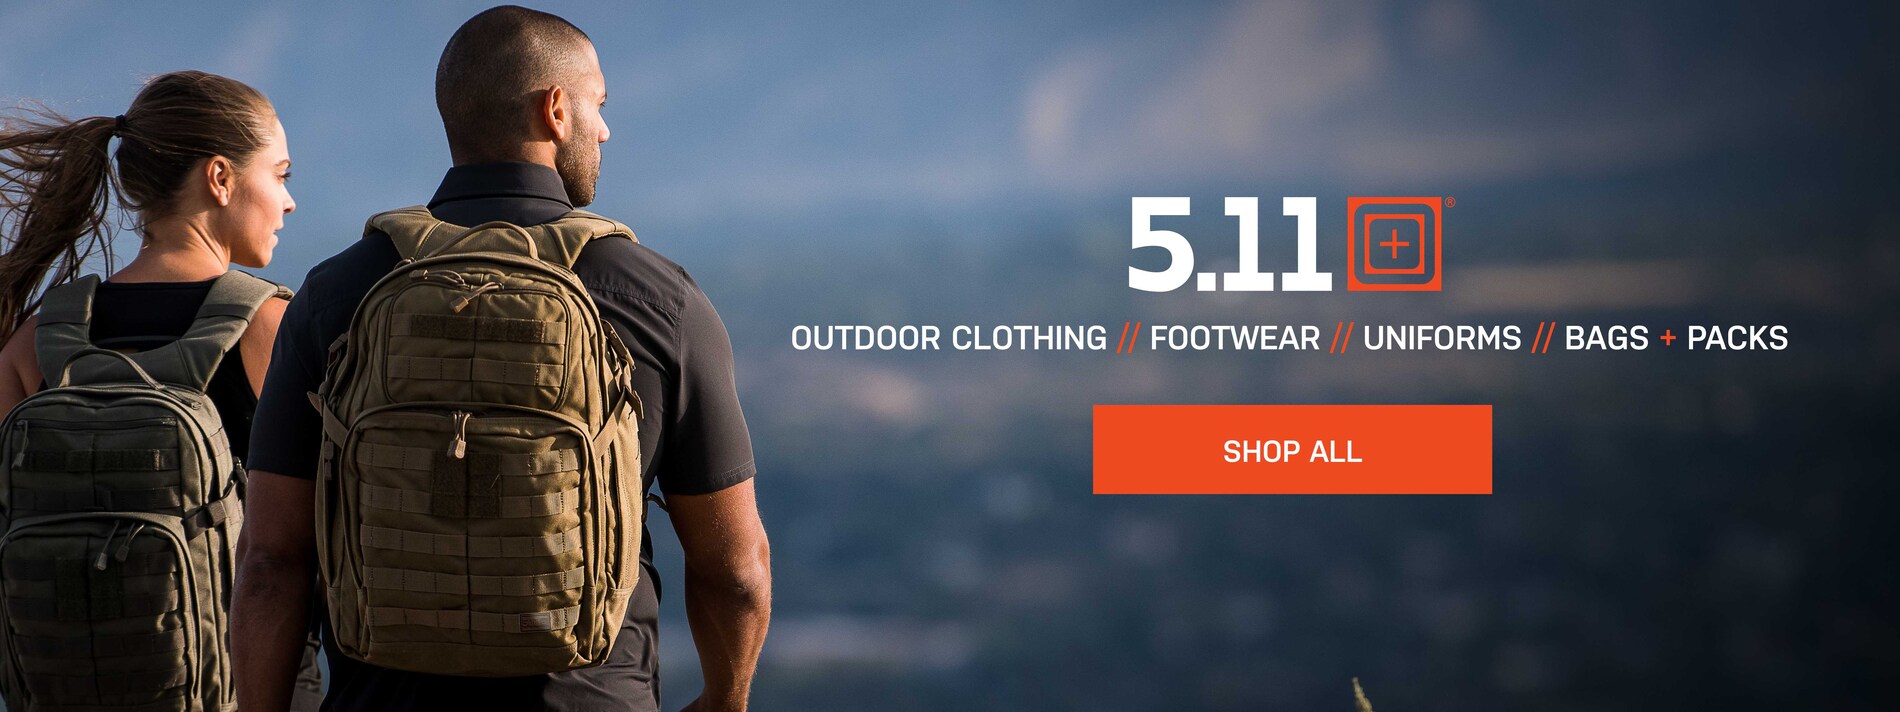 5.11 Tactical  511 Gear and Apparel